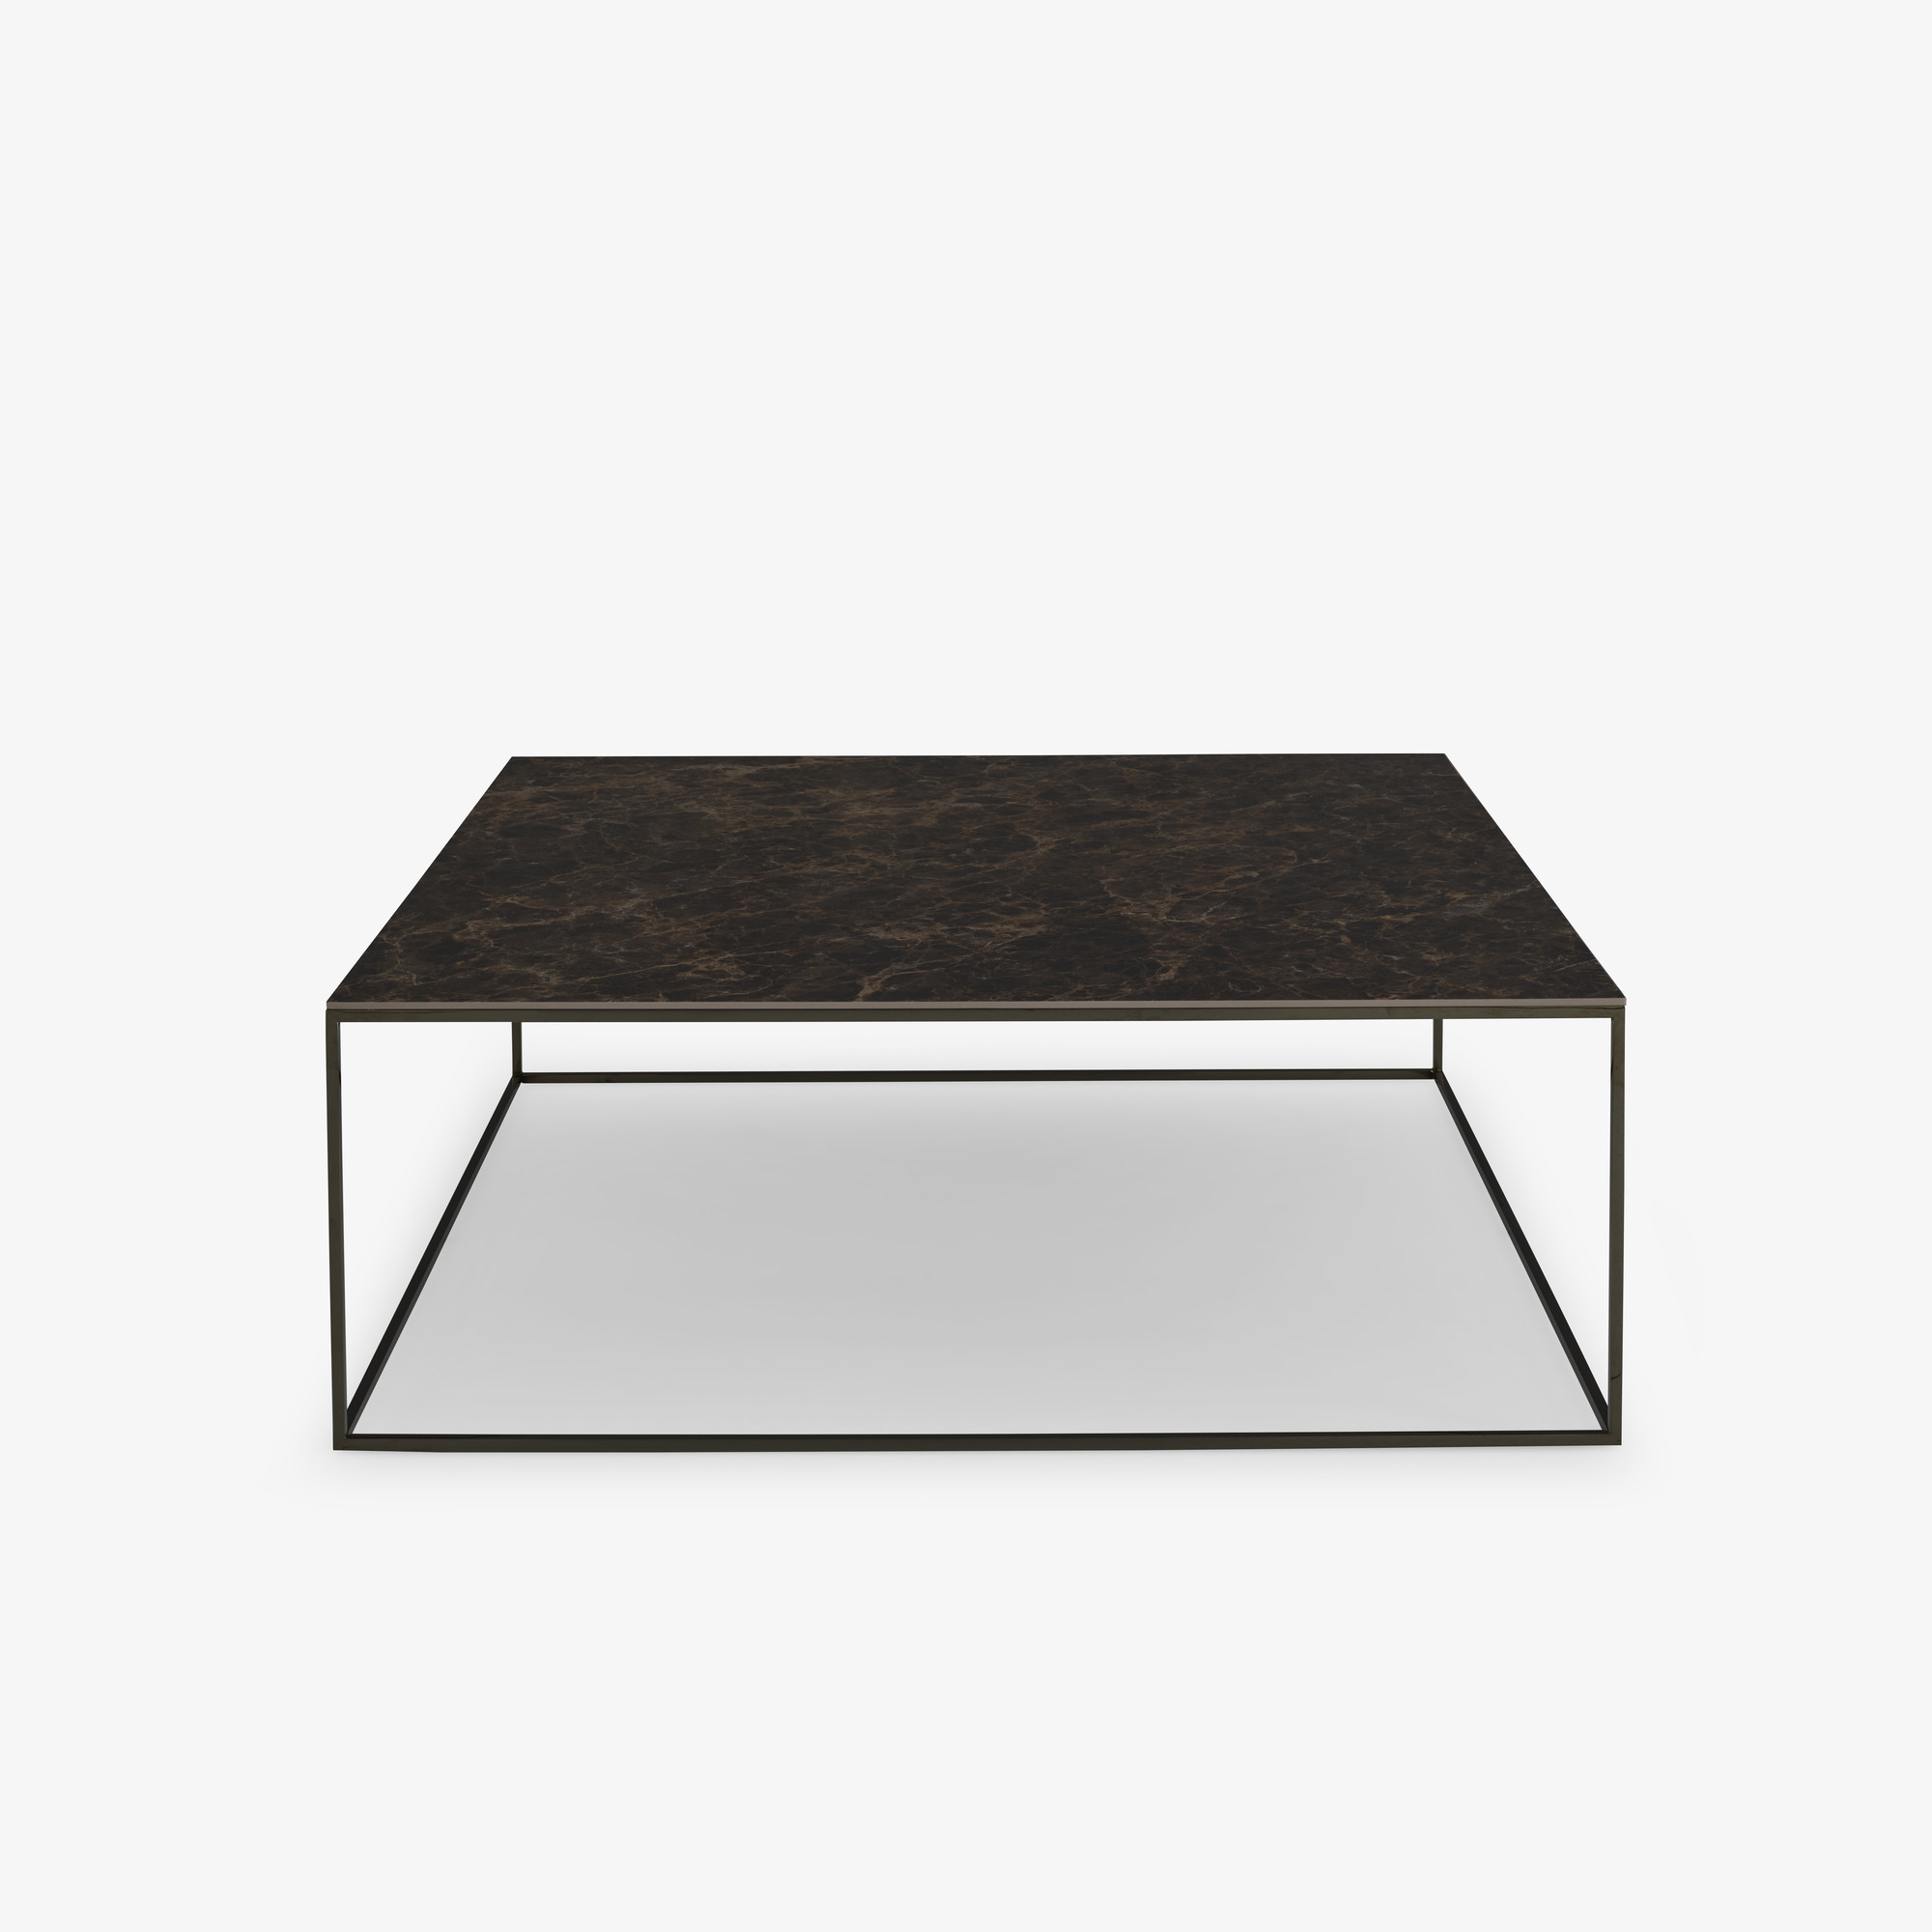 Image Coffee table - large - 1